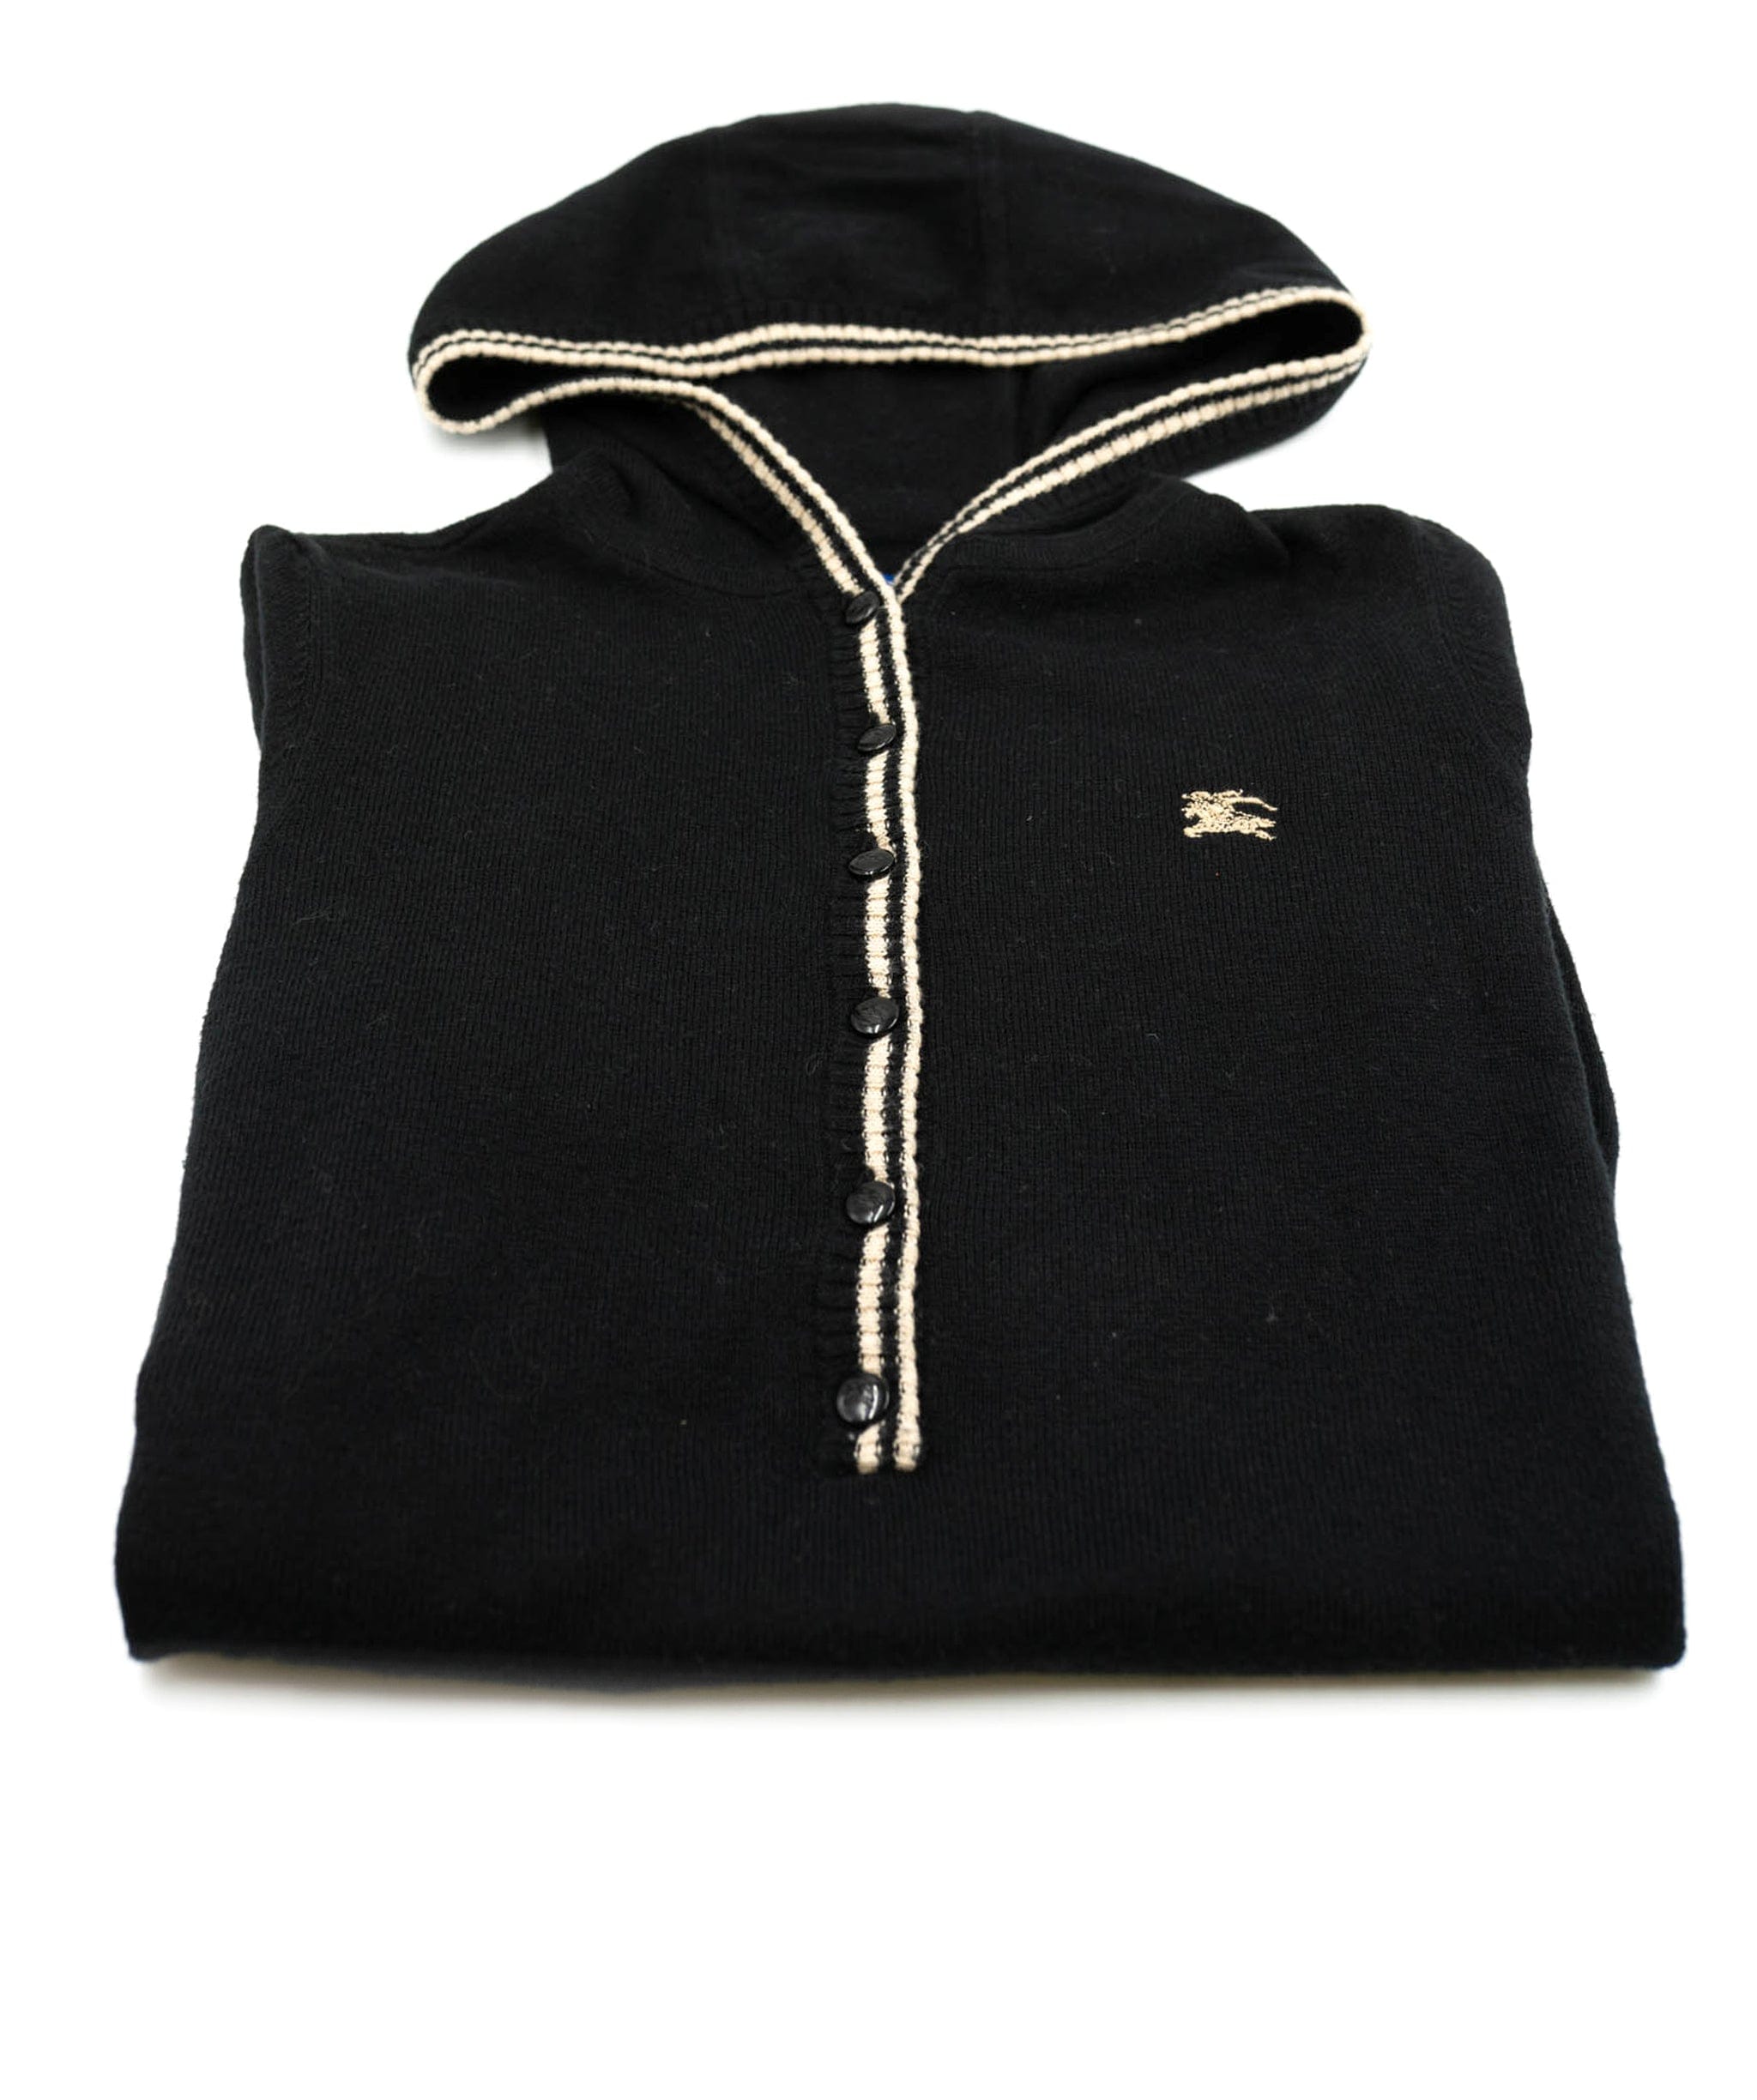 Burberry Burberry Hooded Sweater Black ASL4827